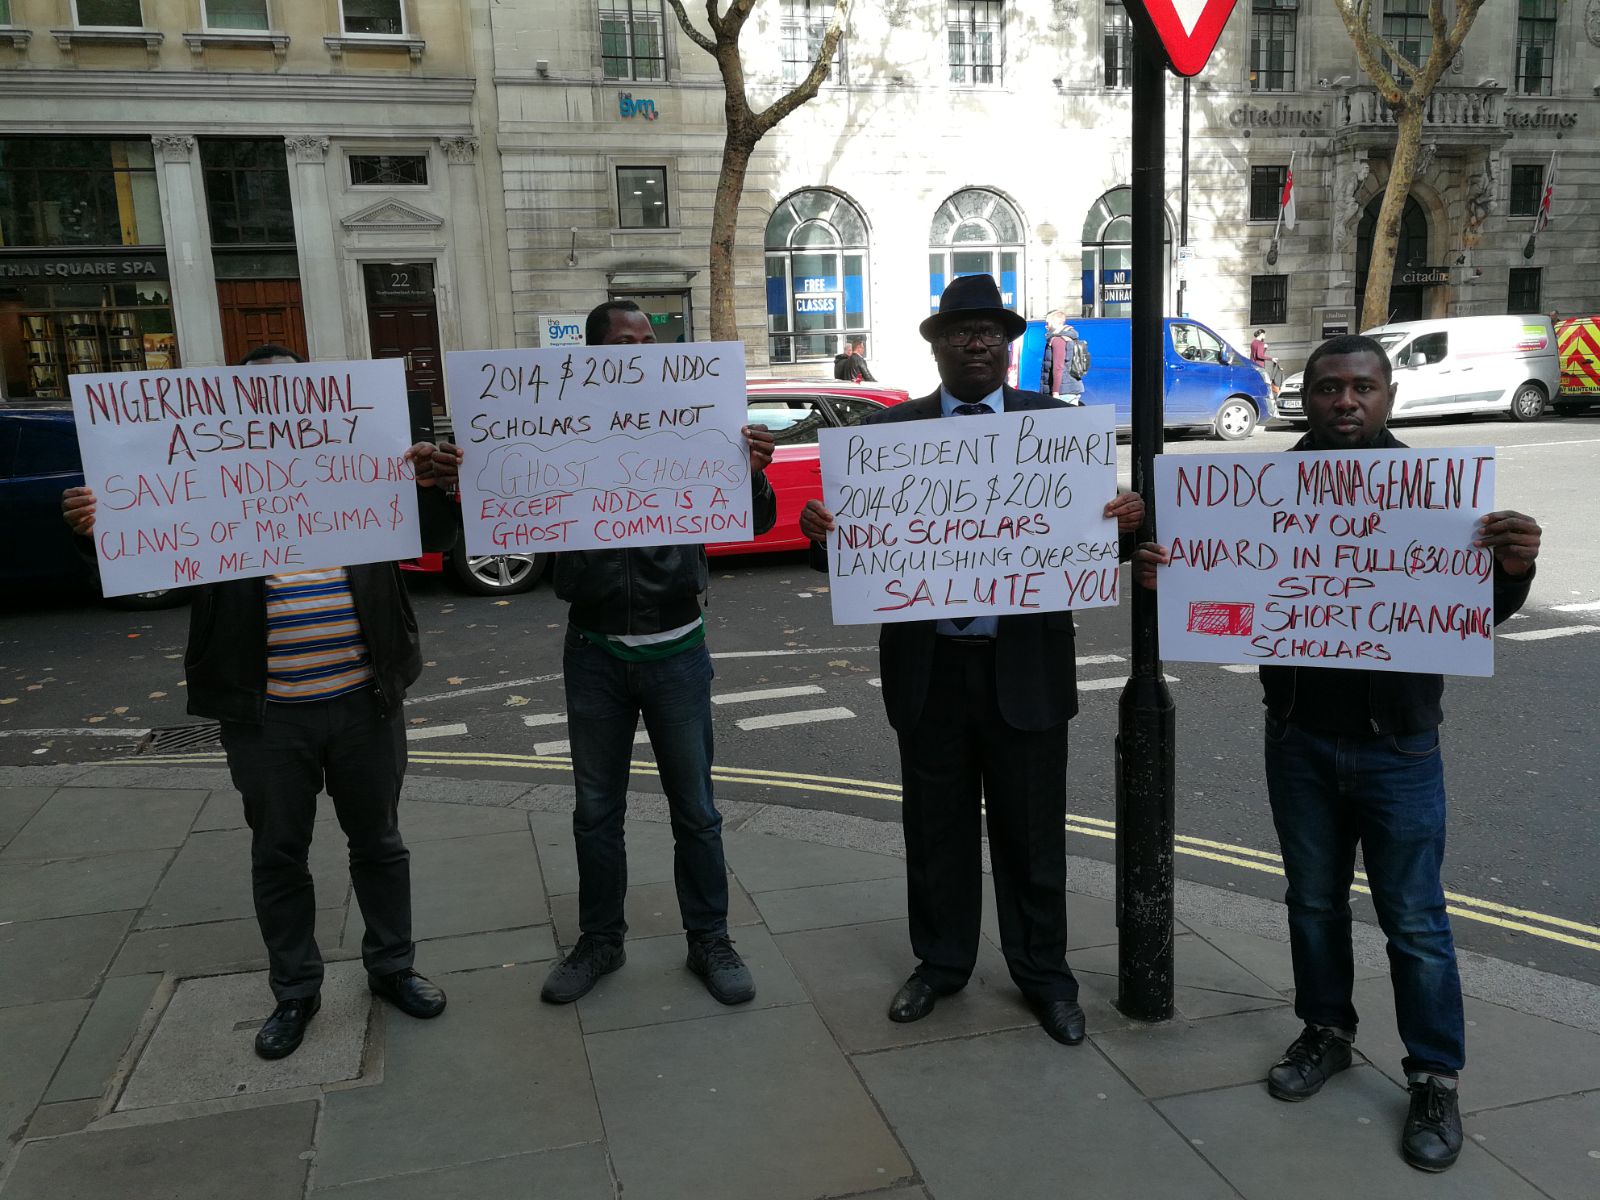 NDDC students protesting in front of the British High Commission to Nigeria